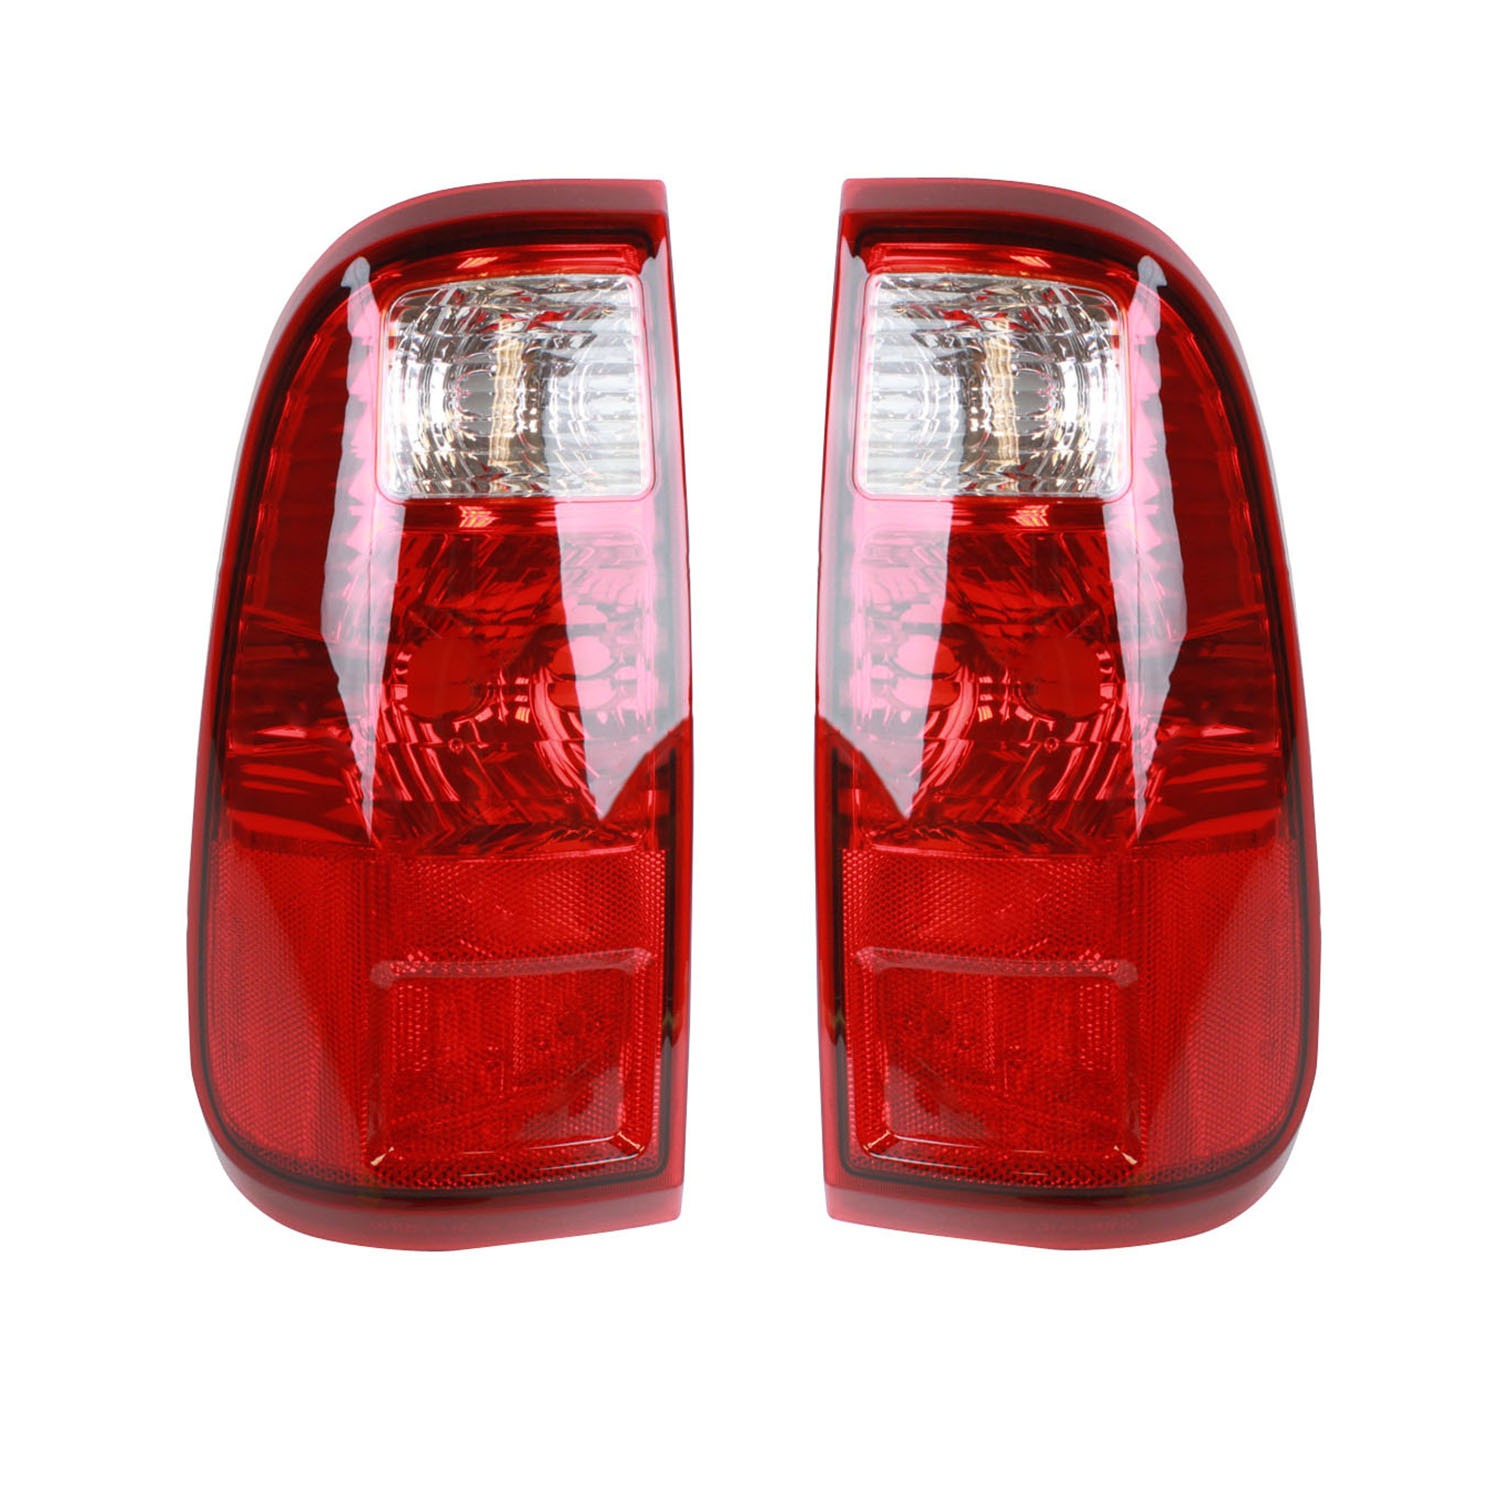 Rareelectrical NEW TAIL LIGHT PAIR COMPATIBLE WITH FORD F-250 F-350 F450 F550 SUPER DUTY 2008-15 FO2800208 FO2801208 BC3Z 13405 A BC3Z13405A